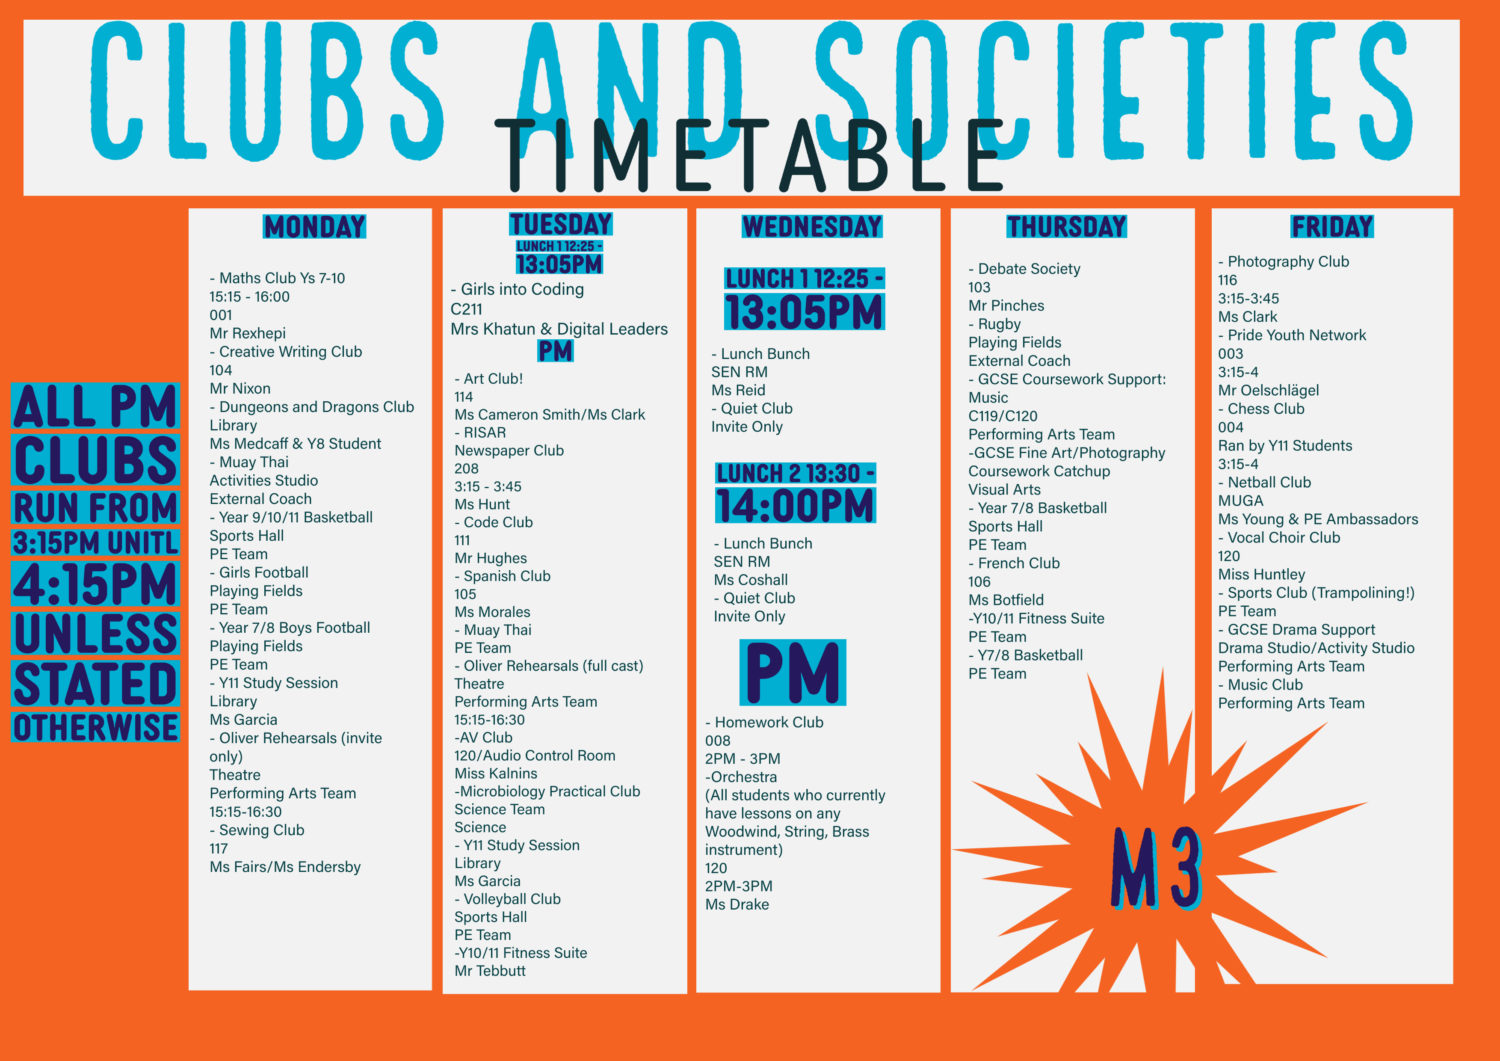 Details of the Extra-Curricular Clubs and Societies for Module 3 in 2022-23.